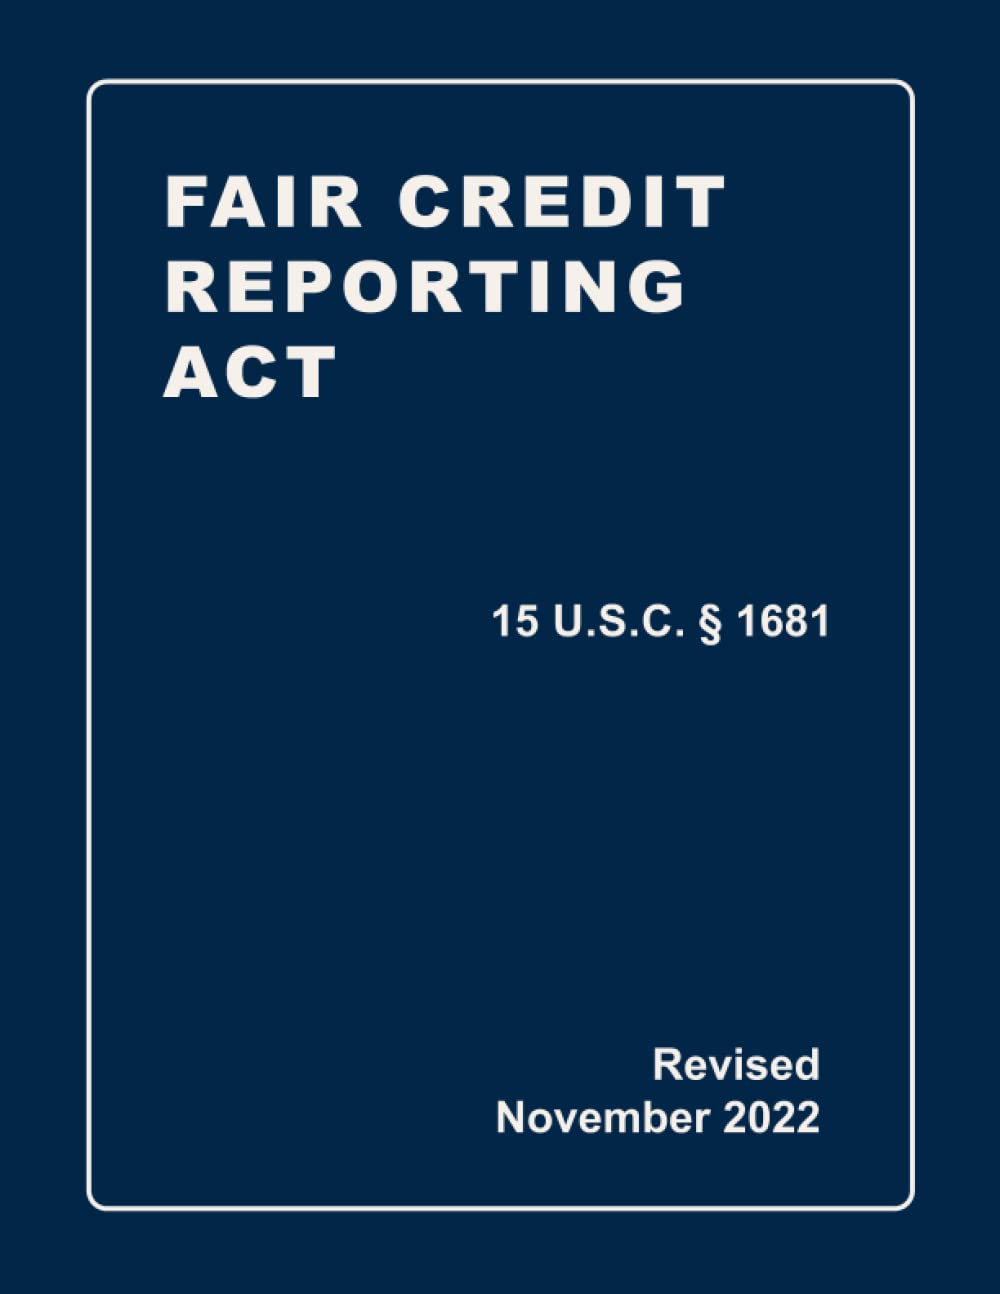 Fair Credit Reporting Act 15 U.S.C § 1681 Revised: A Quick Reference Guide of the FCRA (CCPA Compliance)